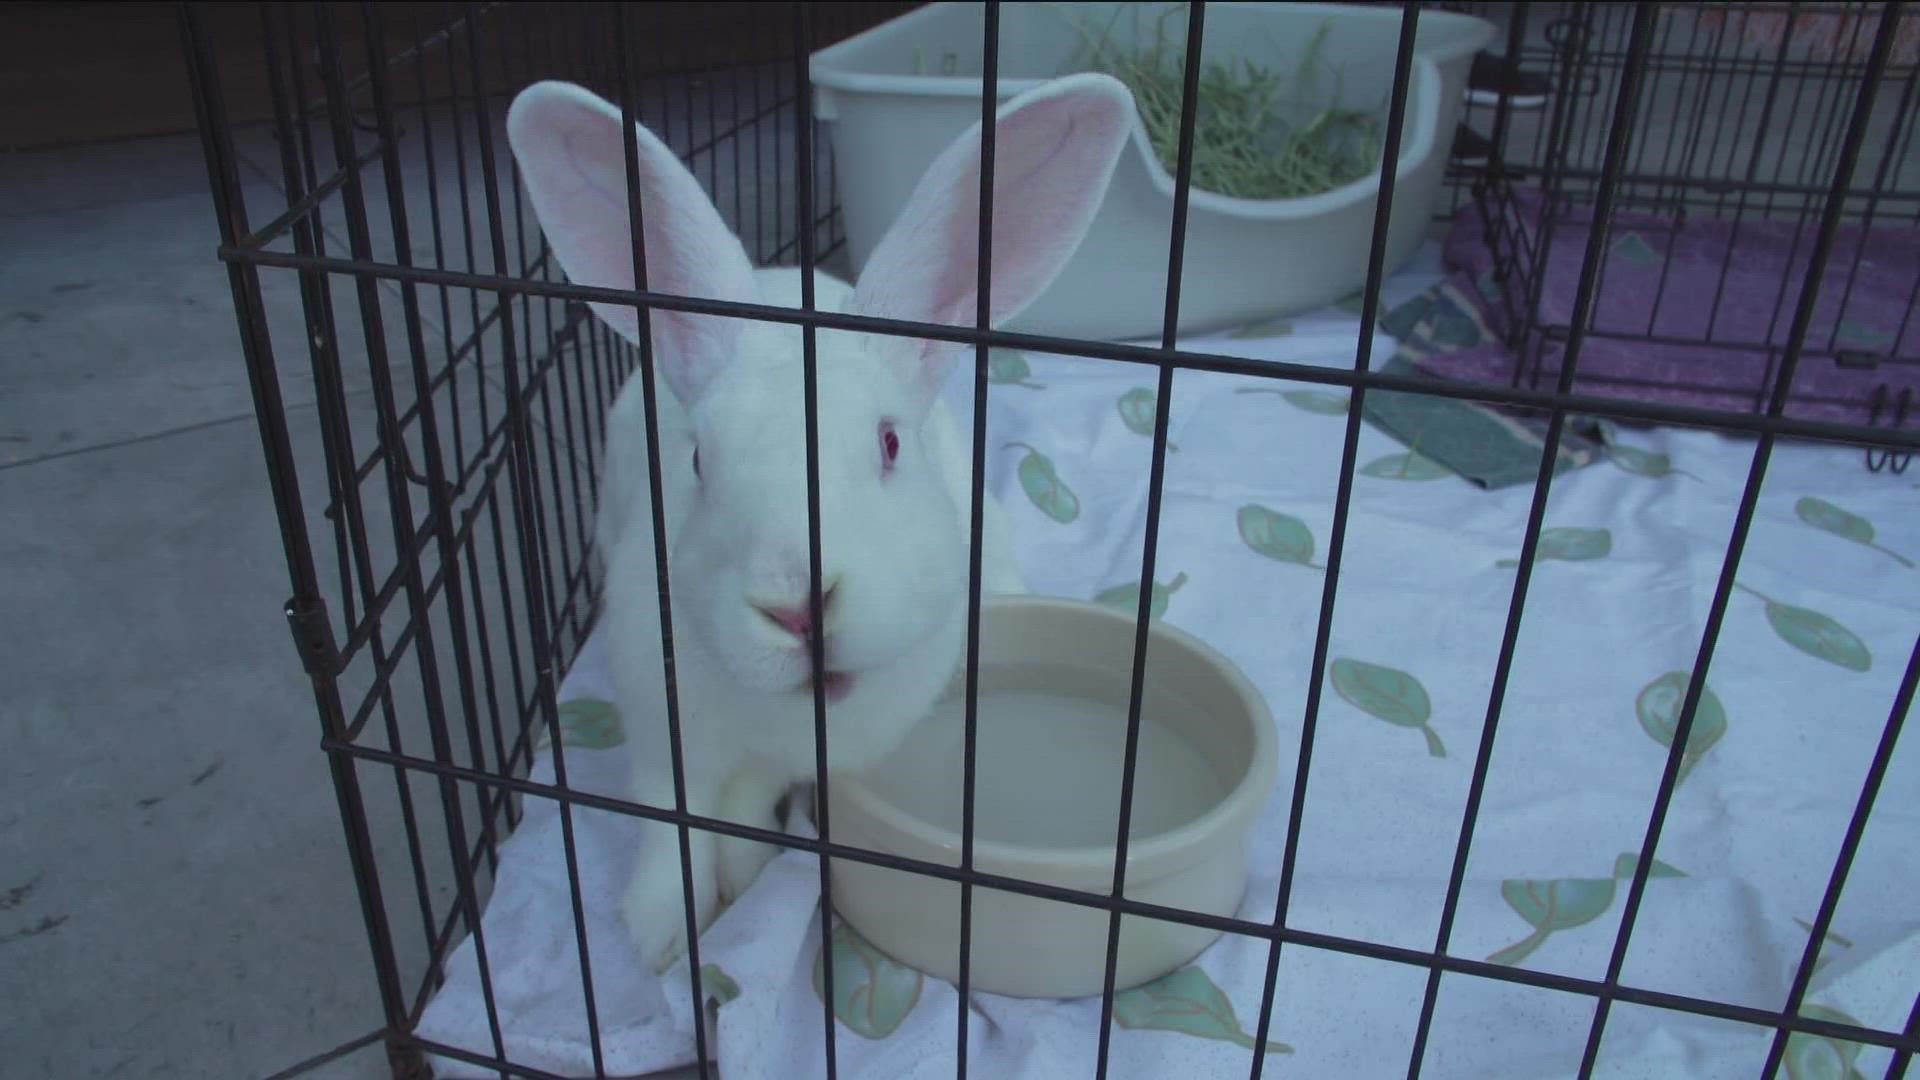 Saturday, Sept. 24, is International Rabbit Day. Celebrate with some adoptable rabbits from the San Diego Humane Society.